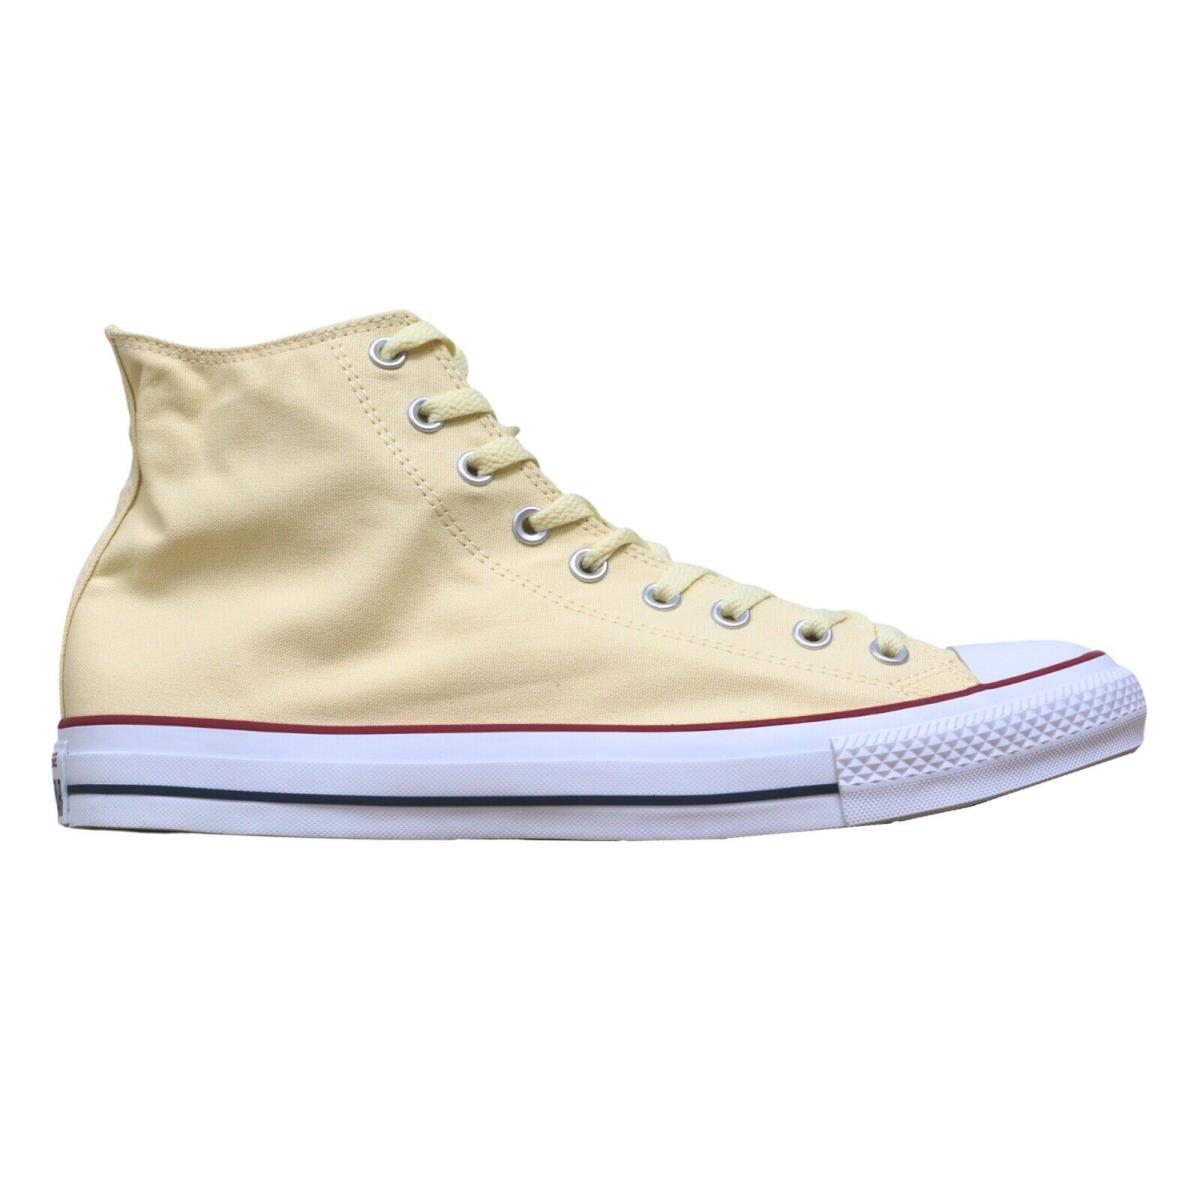 Size 16 Converse Unisex M9162 Chuck Taylor All Star HI Natural White